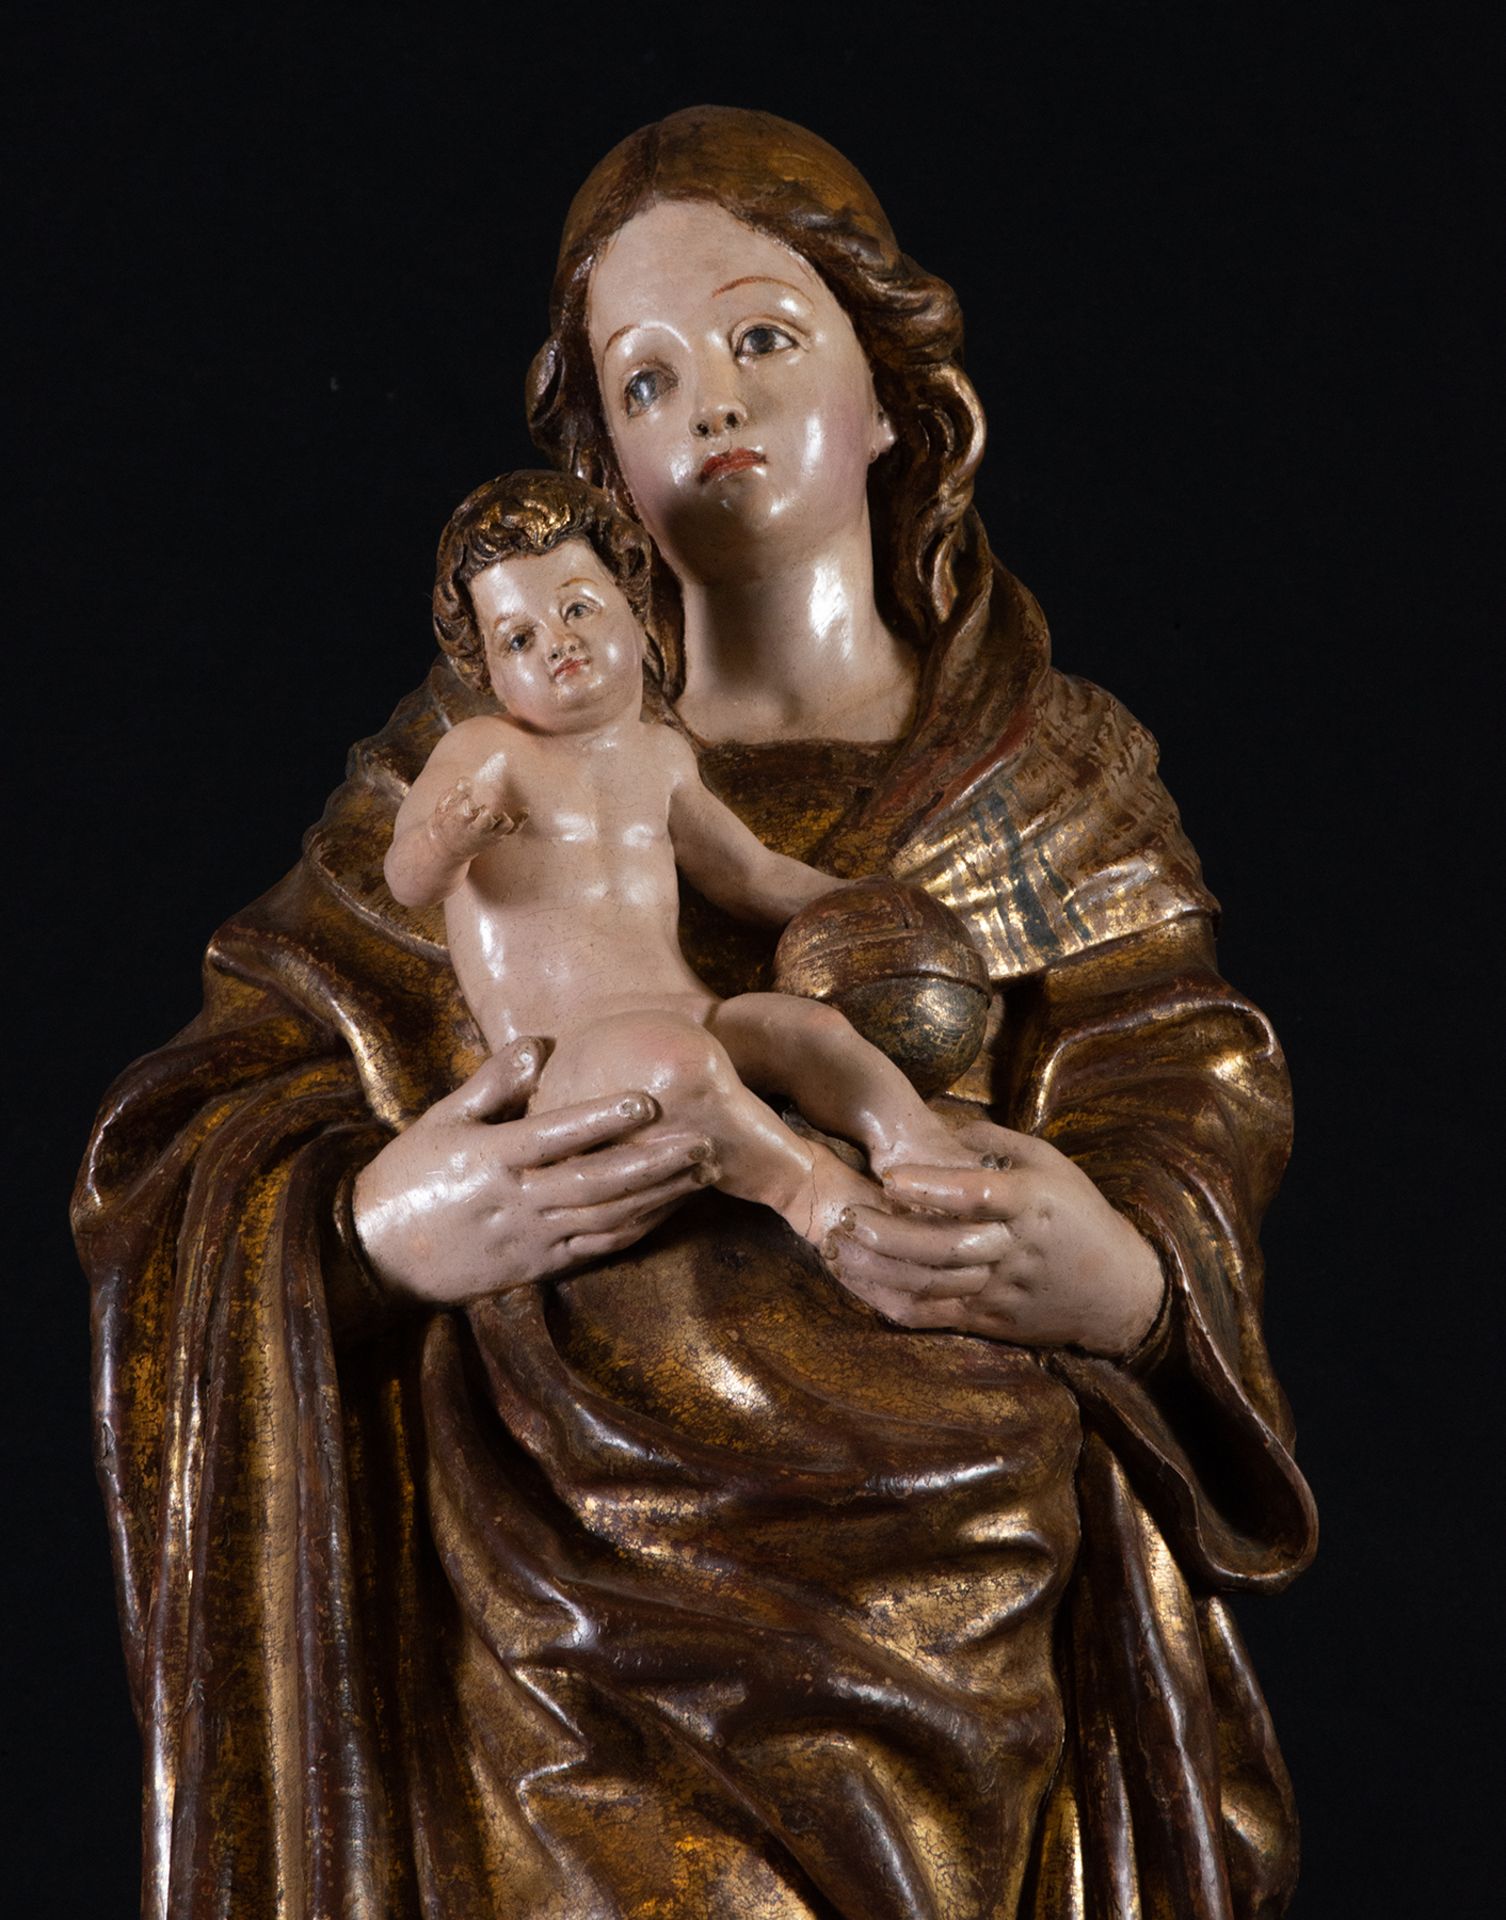 Spectacular Large Virgin with Child in her arms in wood carving, Romanist school of the 16th century - Image 2 of 9